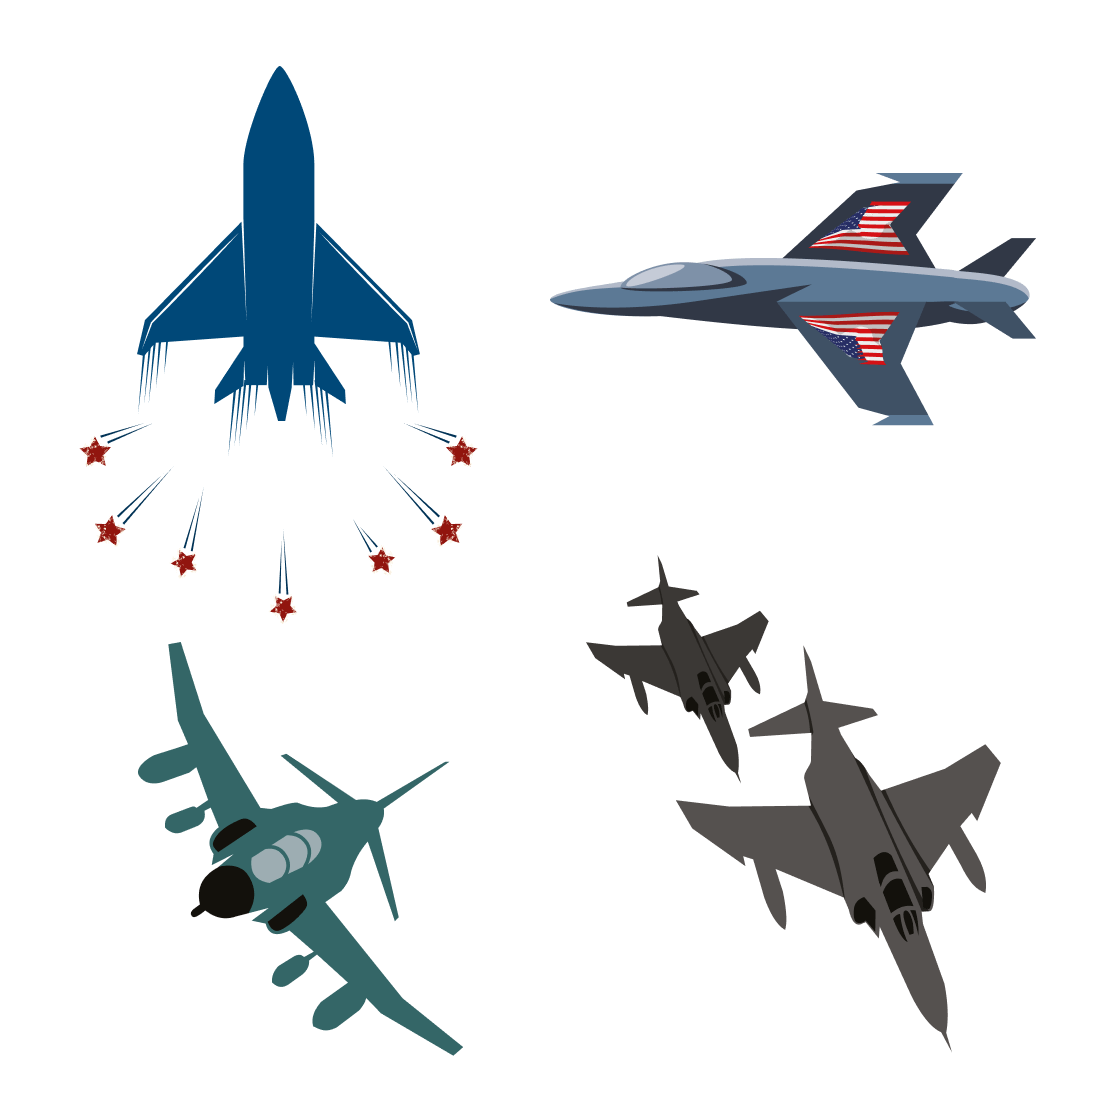 American military aircraft with missiles.